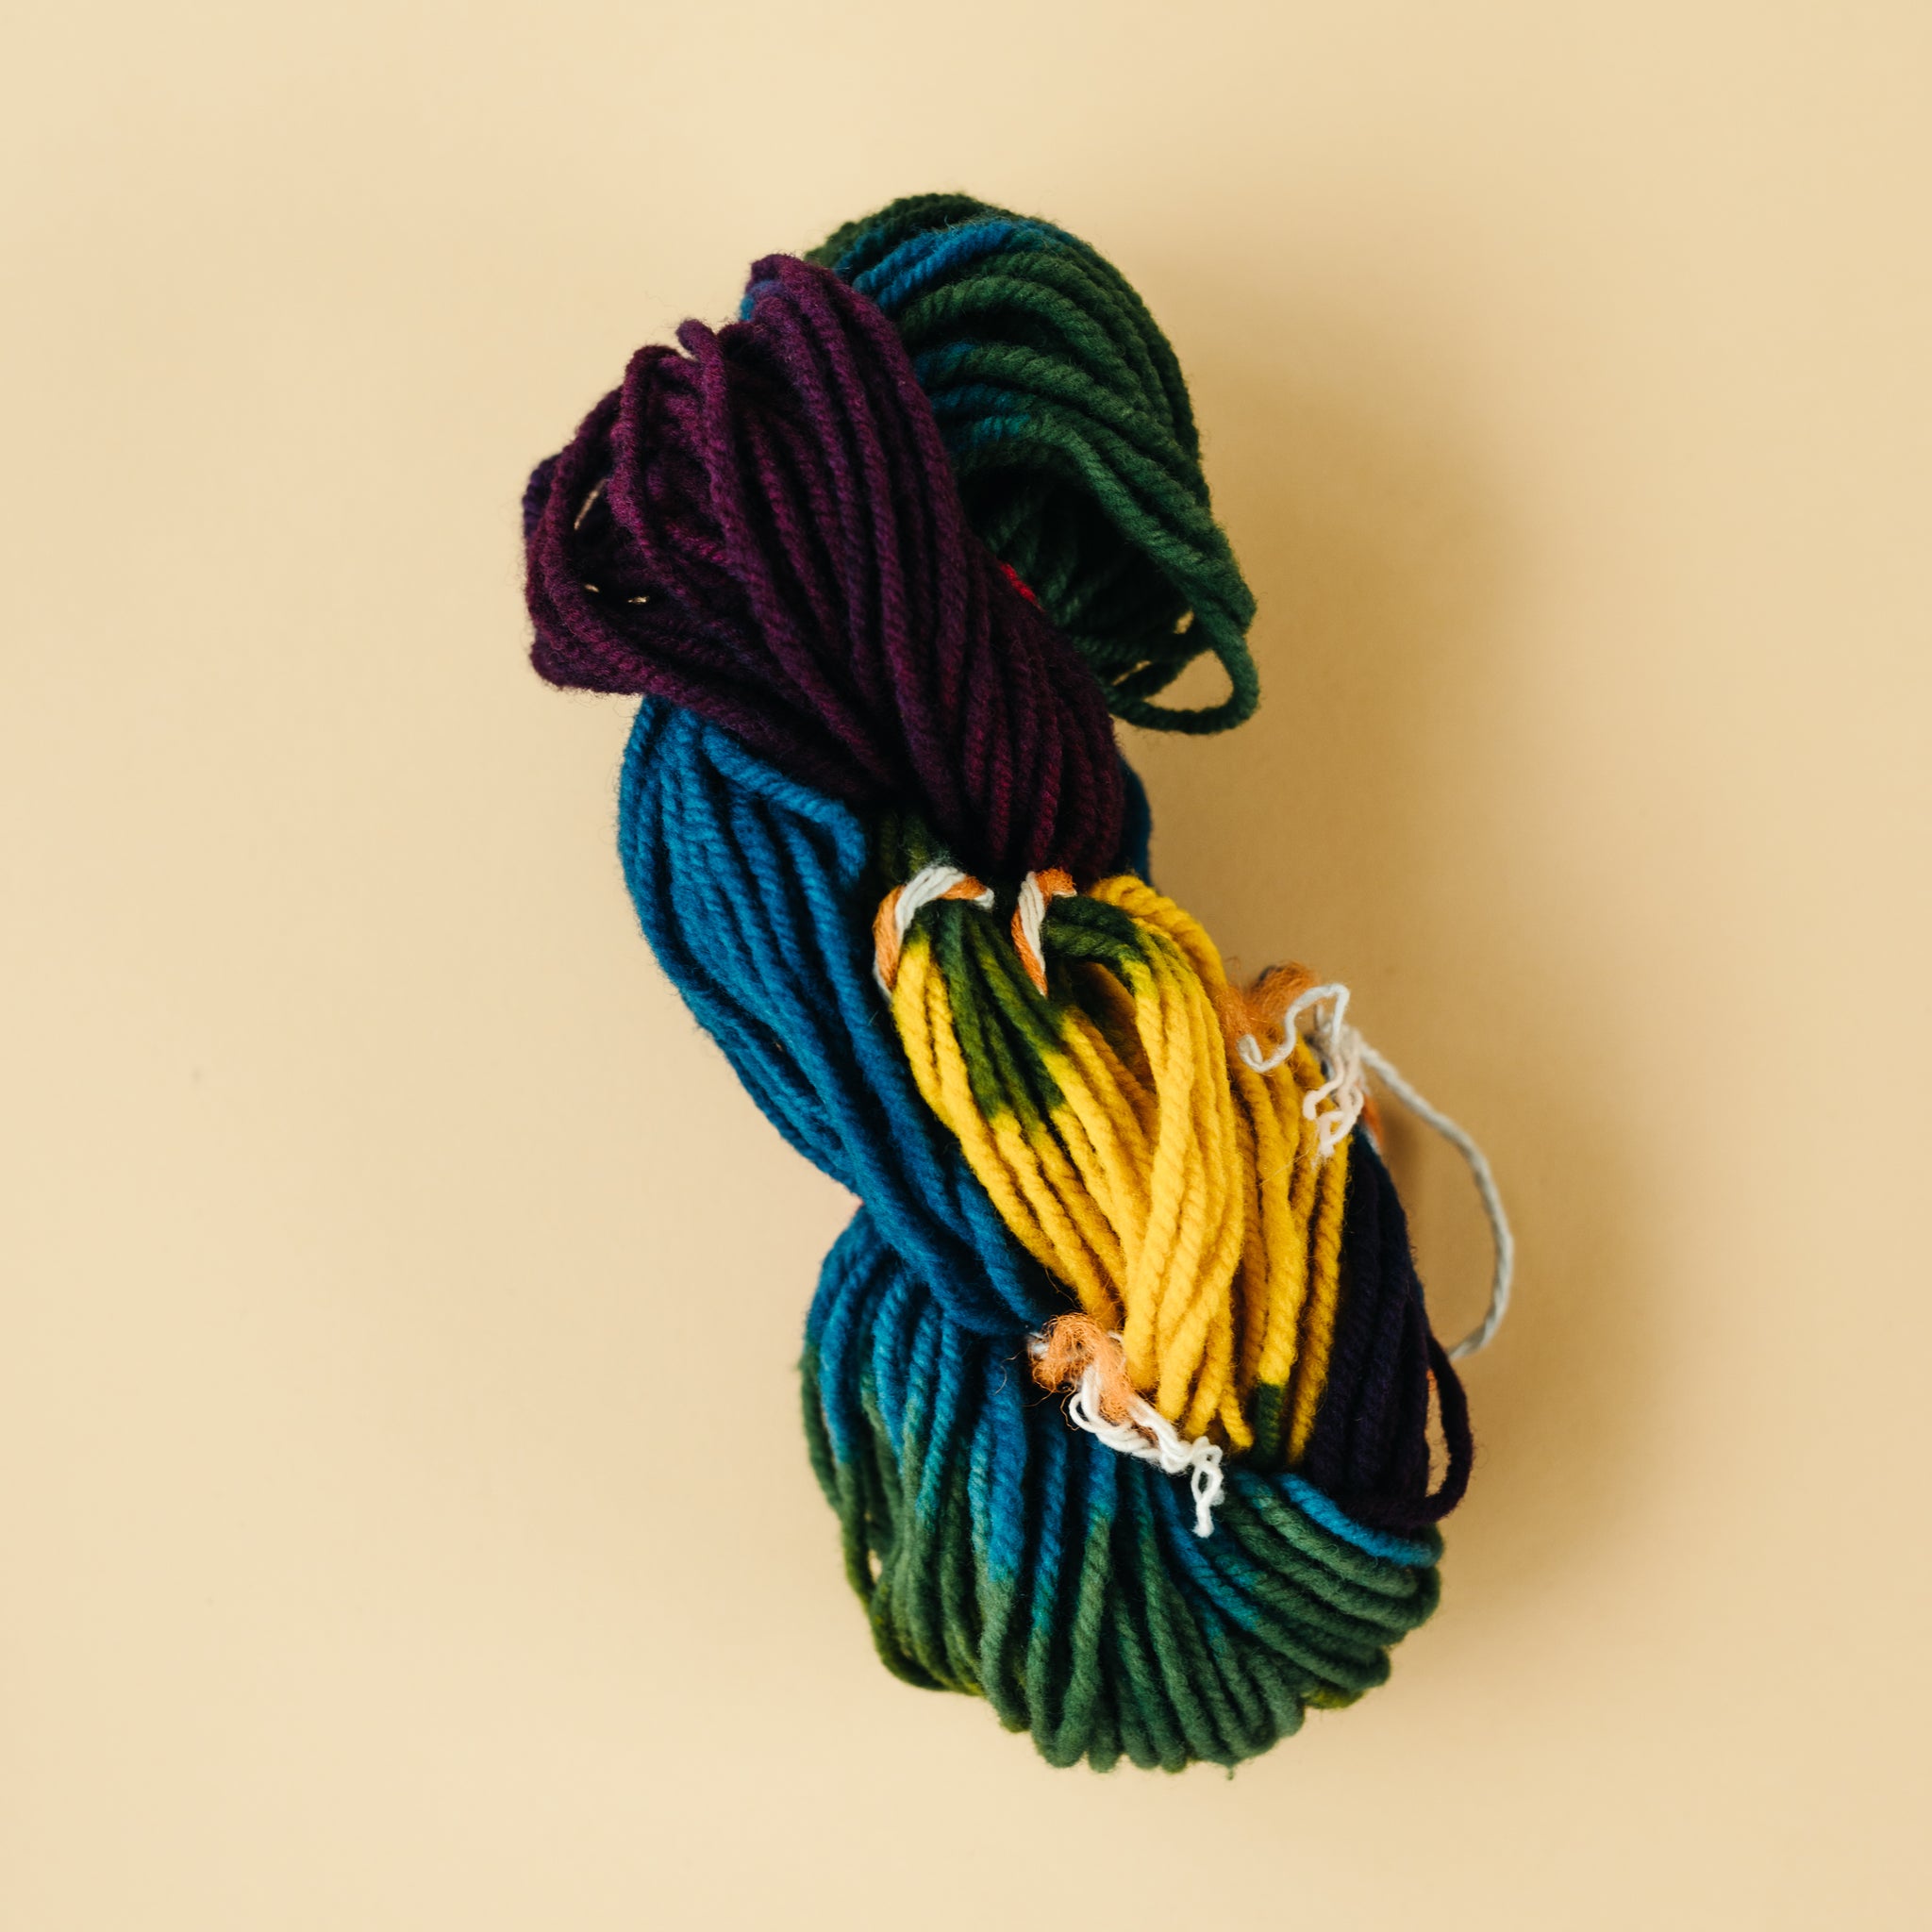 Plant Dyed Wool